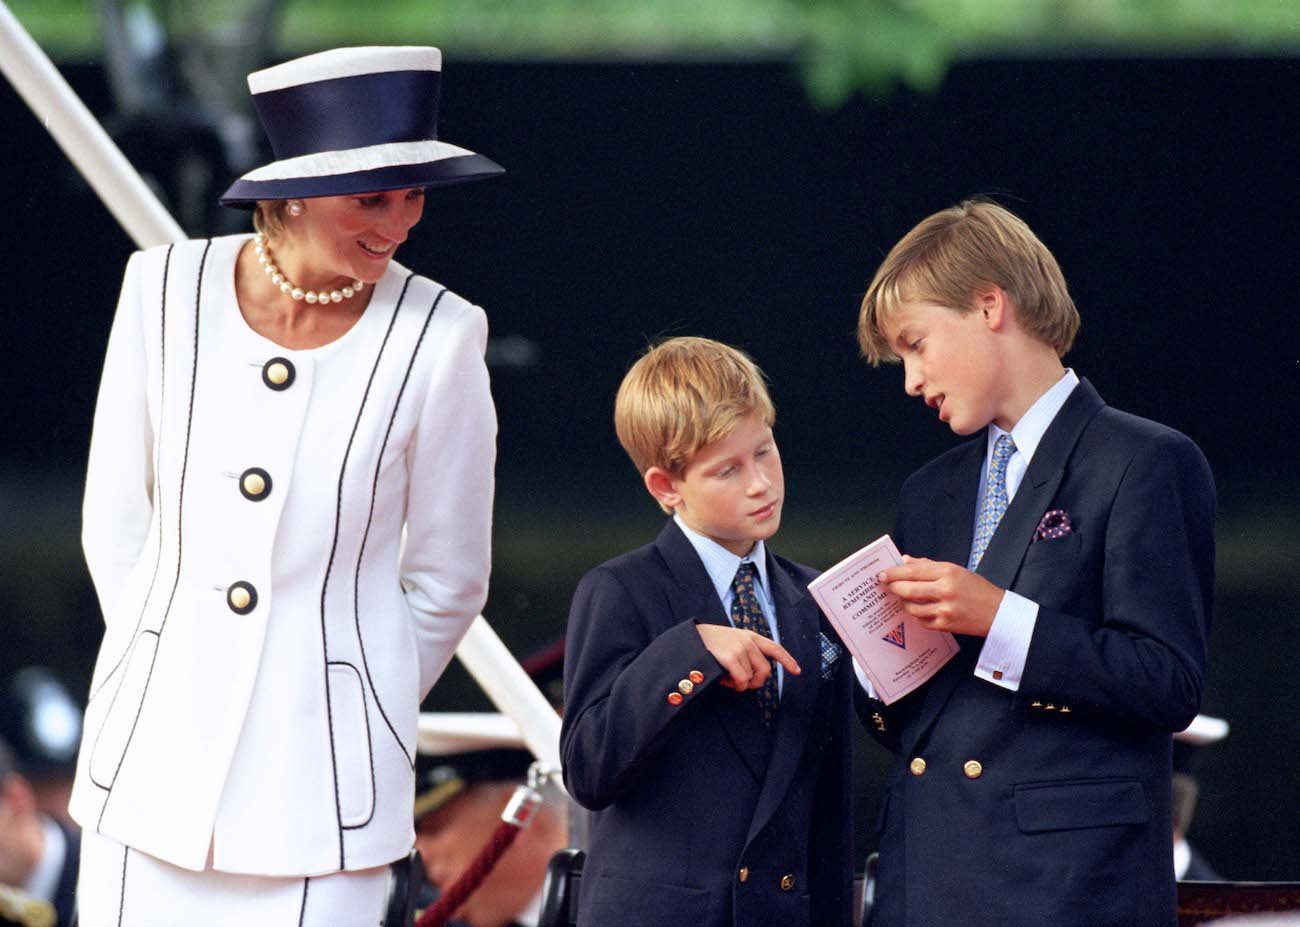 Princess Diana standing with Prince Harry and Prince William when they were younger